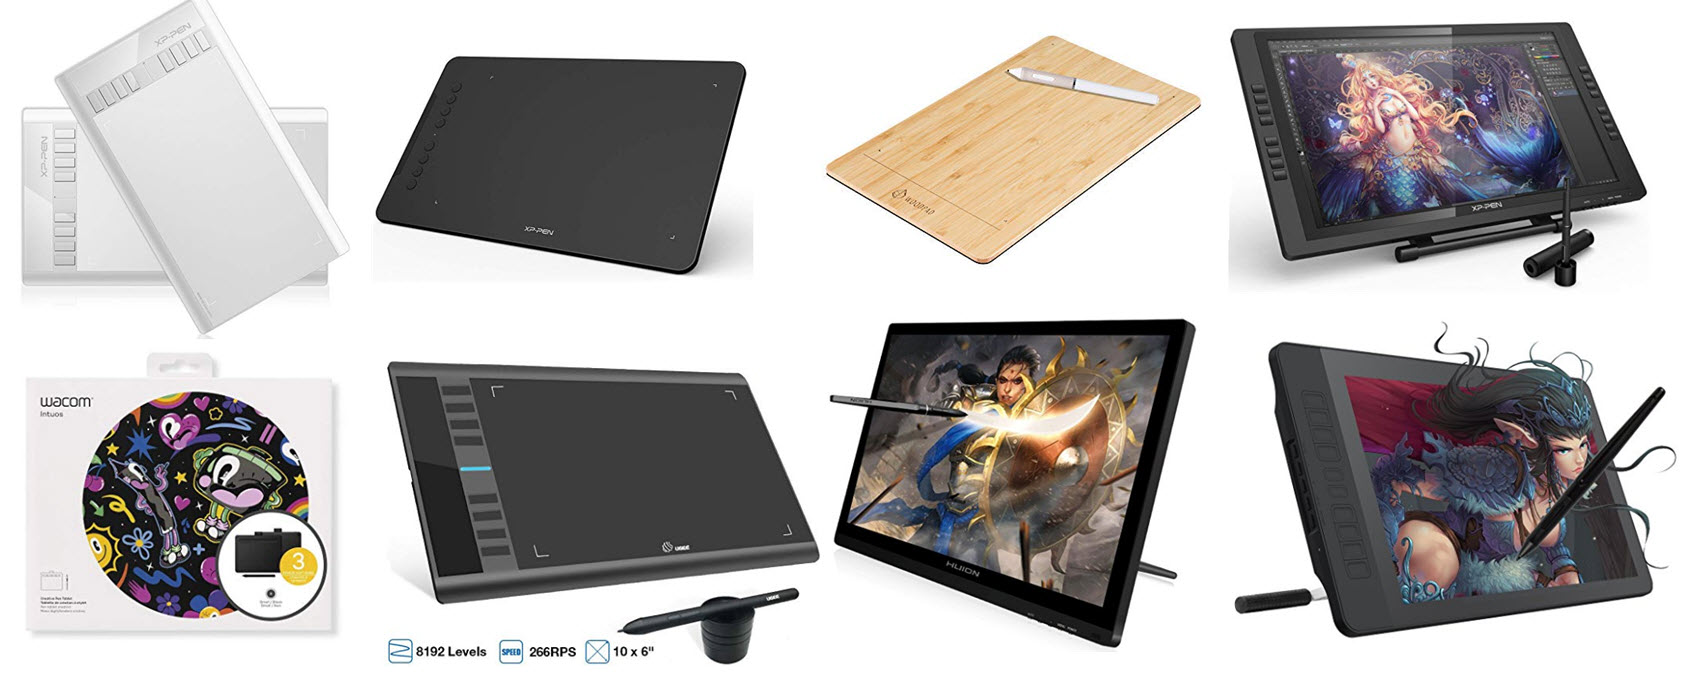 huion gt-190 hd drawing graphics tablet display for mac windows pc